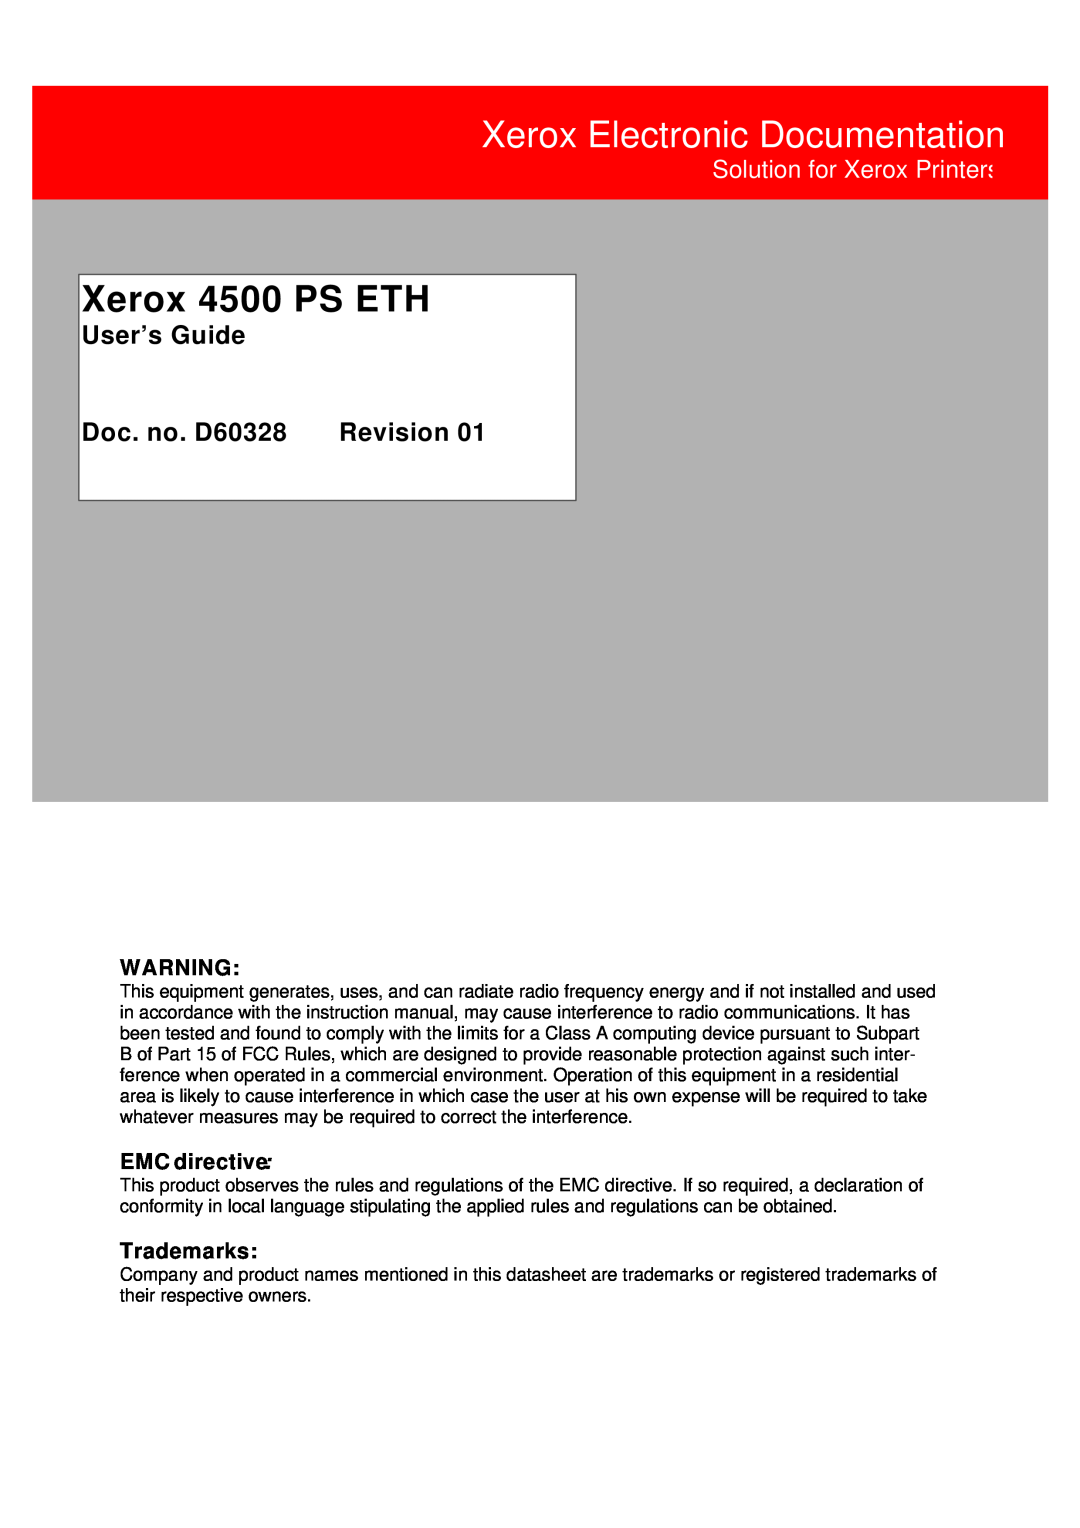 Xerox 4500 ps eth instruction manual User’s Guide, Doc. no. D60328, Revision, EMC directive, Trademarks, Xerox 4500 PS ETH 